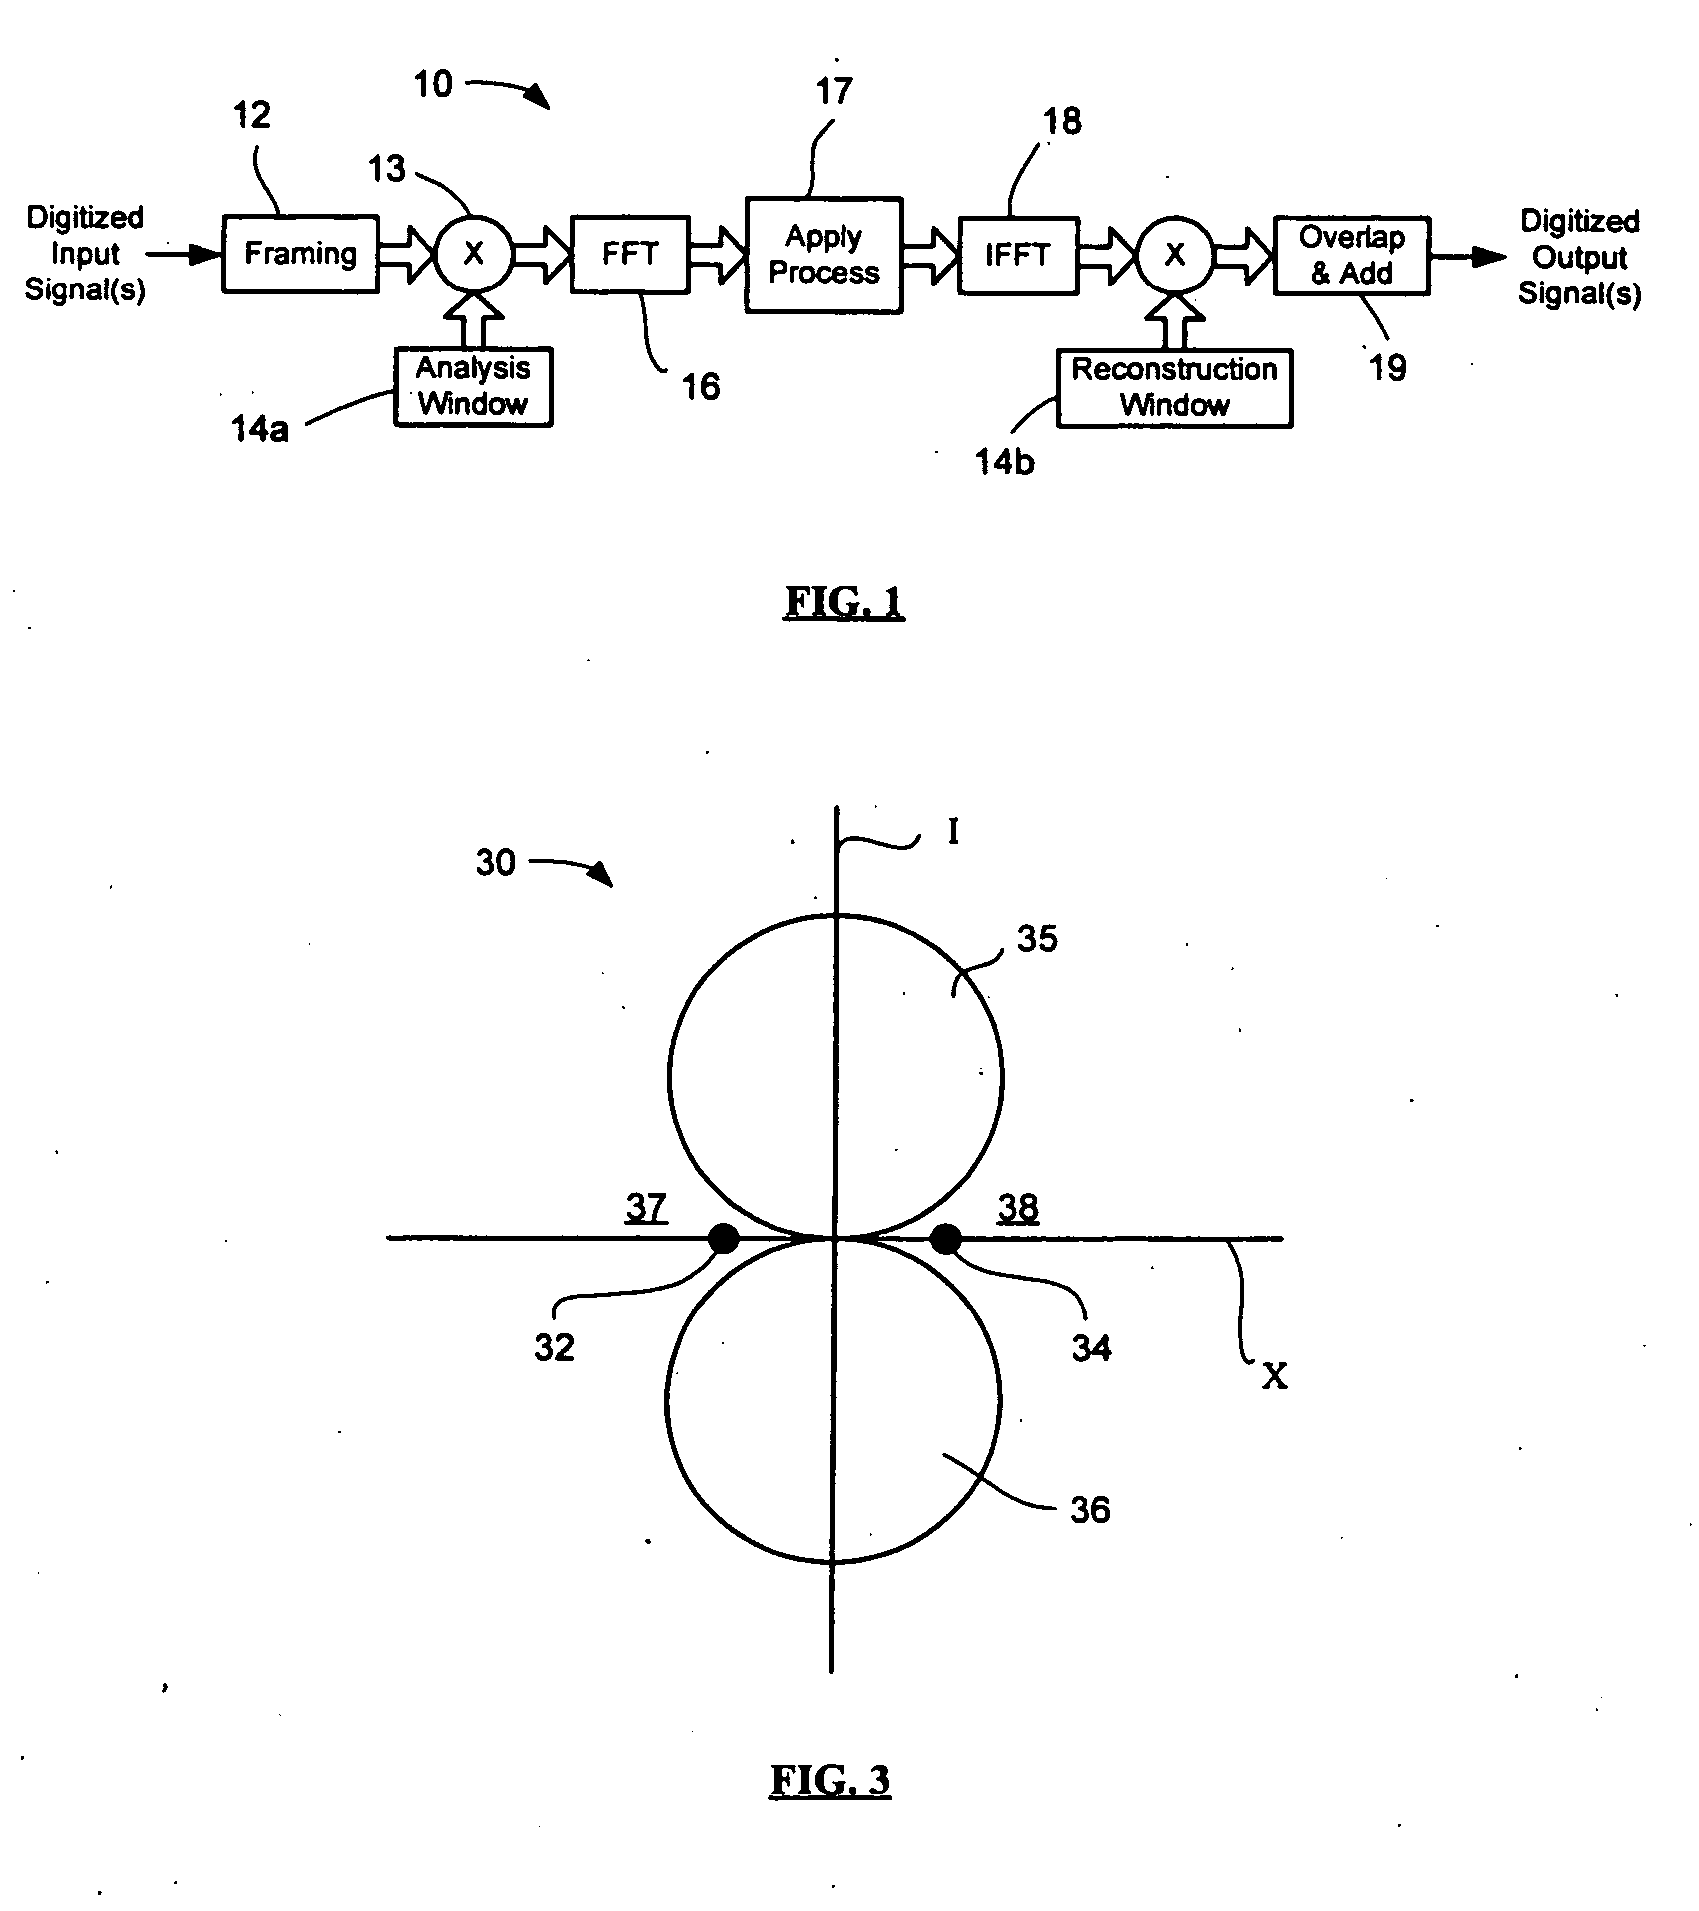 Method & apparatus for accommodating device and/or signal mismatch in a sensor array